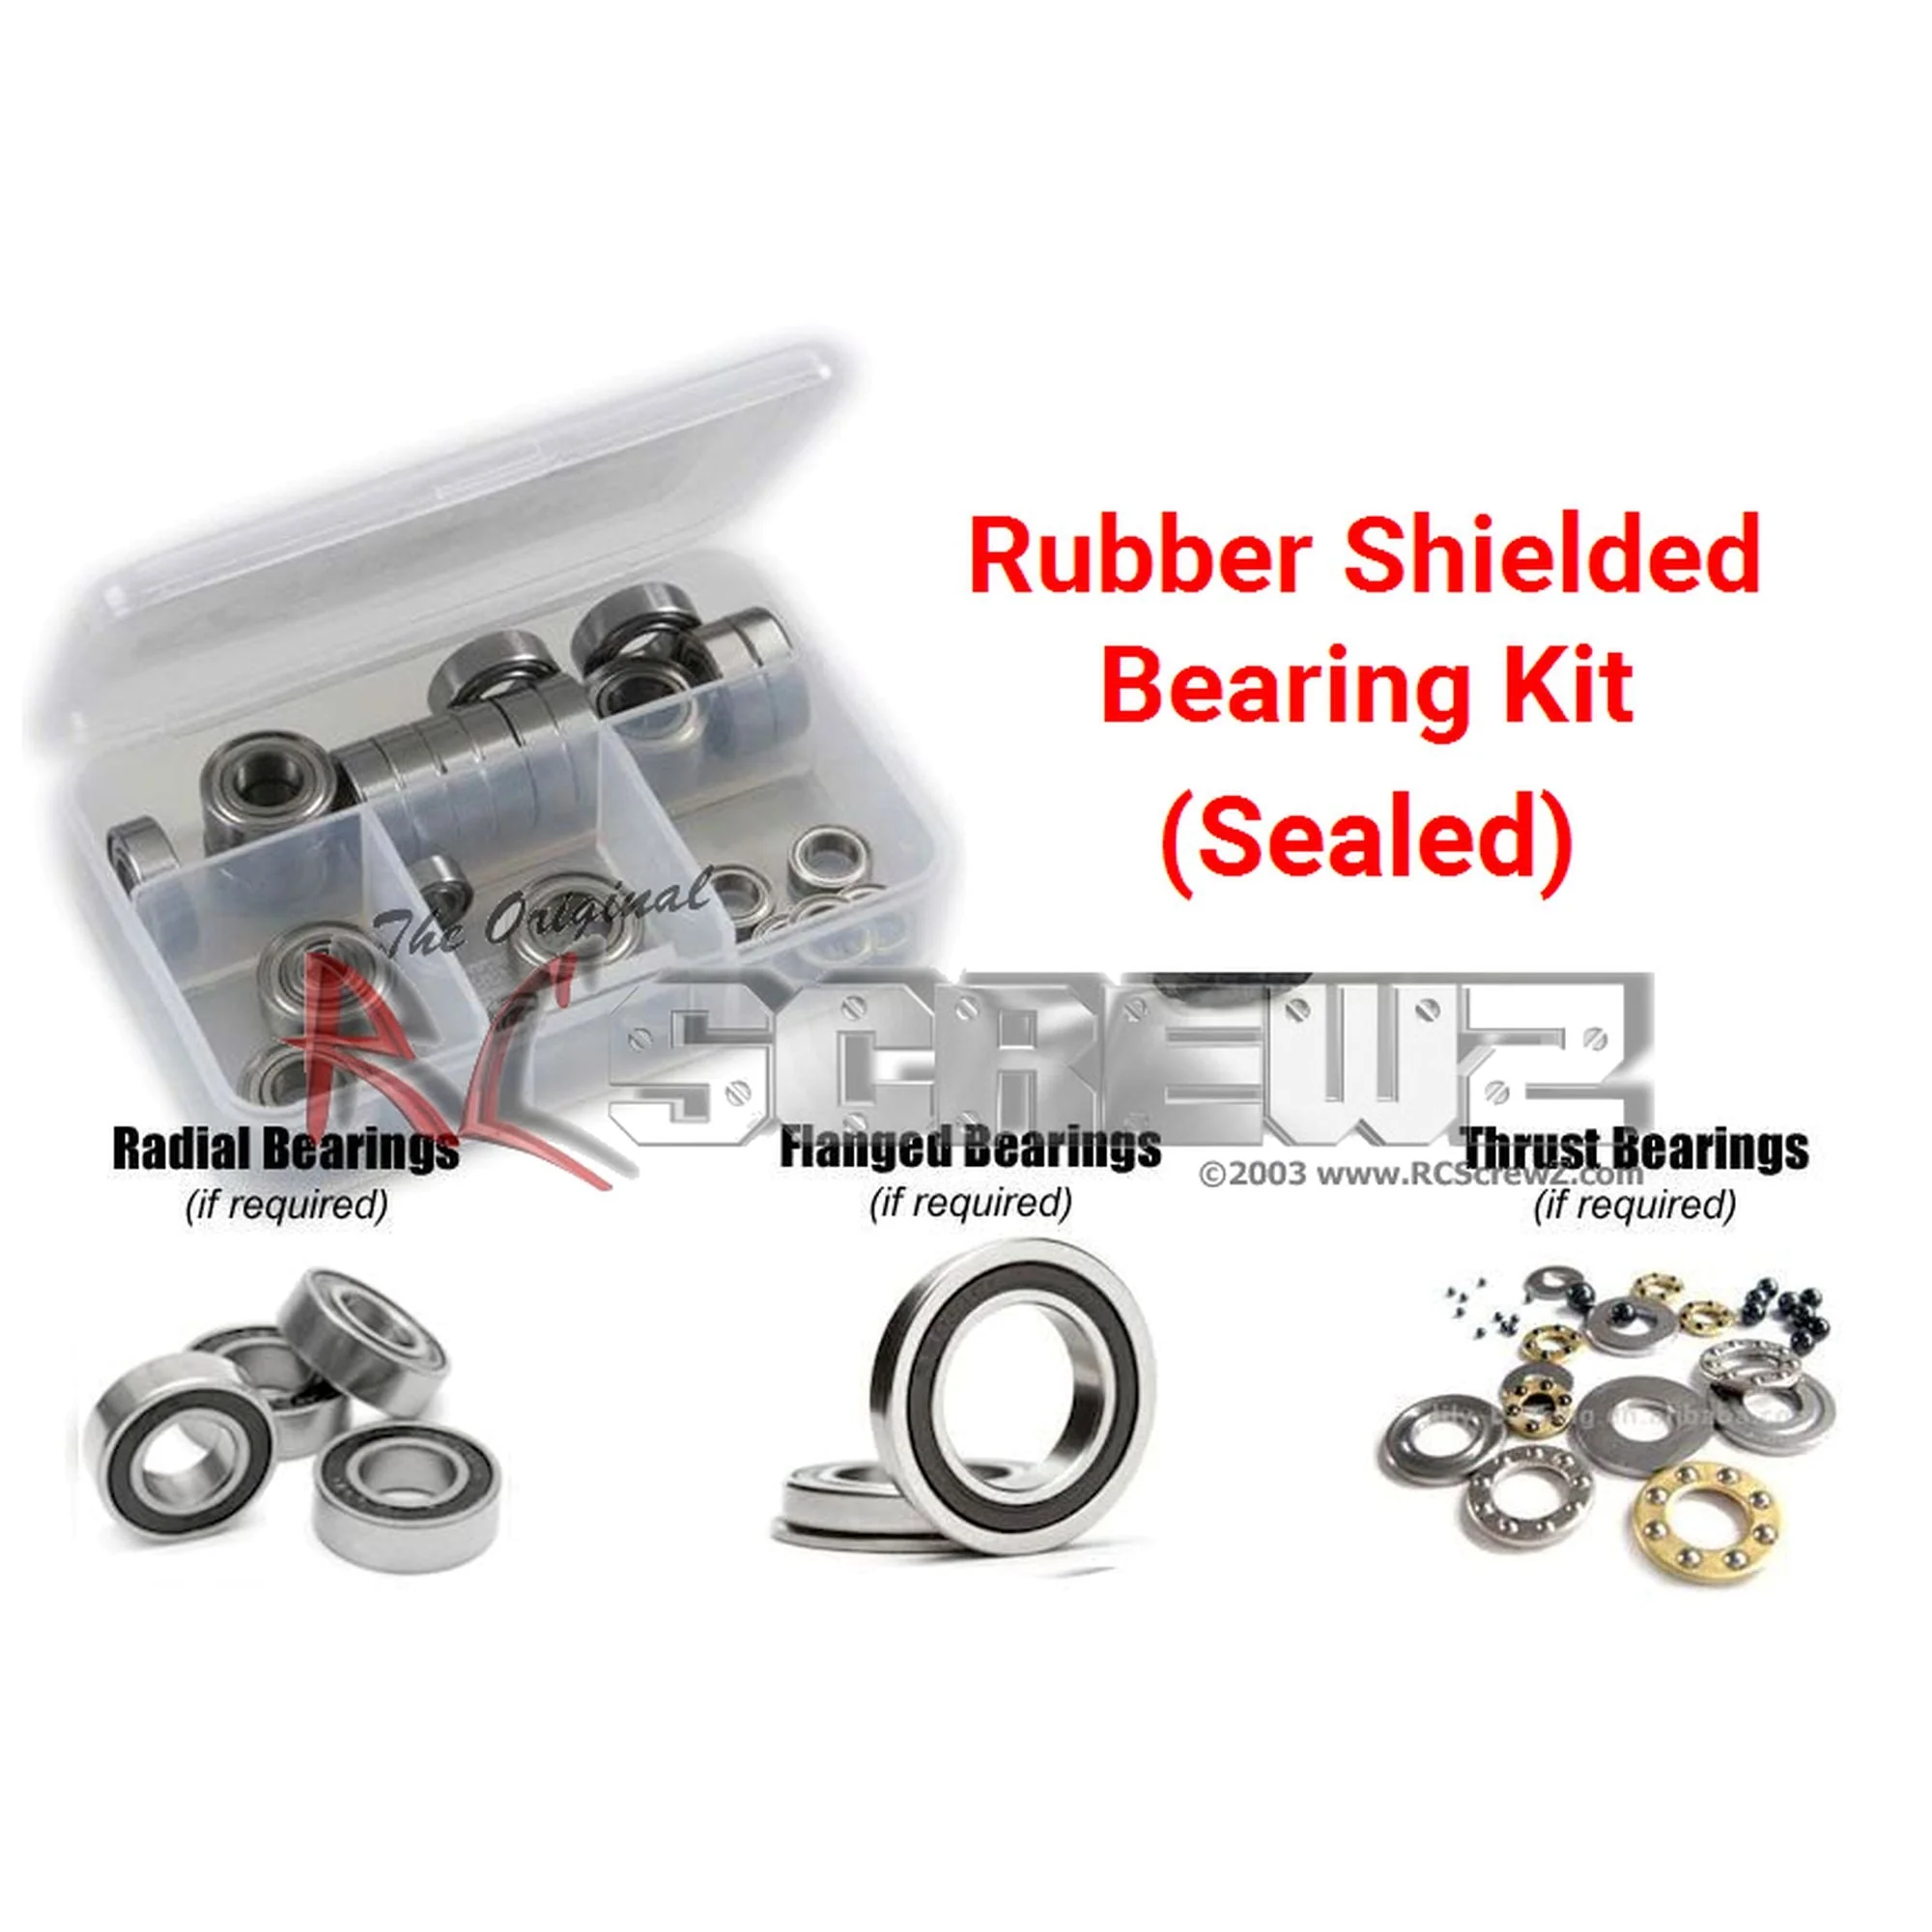 RCScrewZ Rubber Shielded Bearing Kit kyo125r for Kyosho Ultima SC 1/10th #30855 - Picture 1 of 12